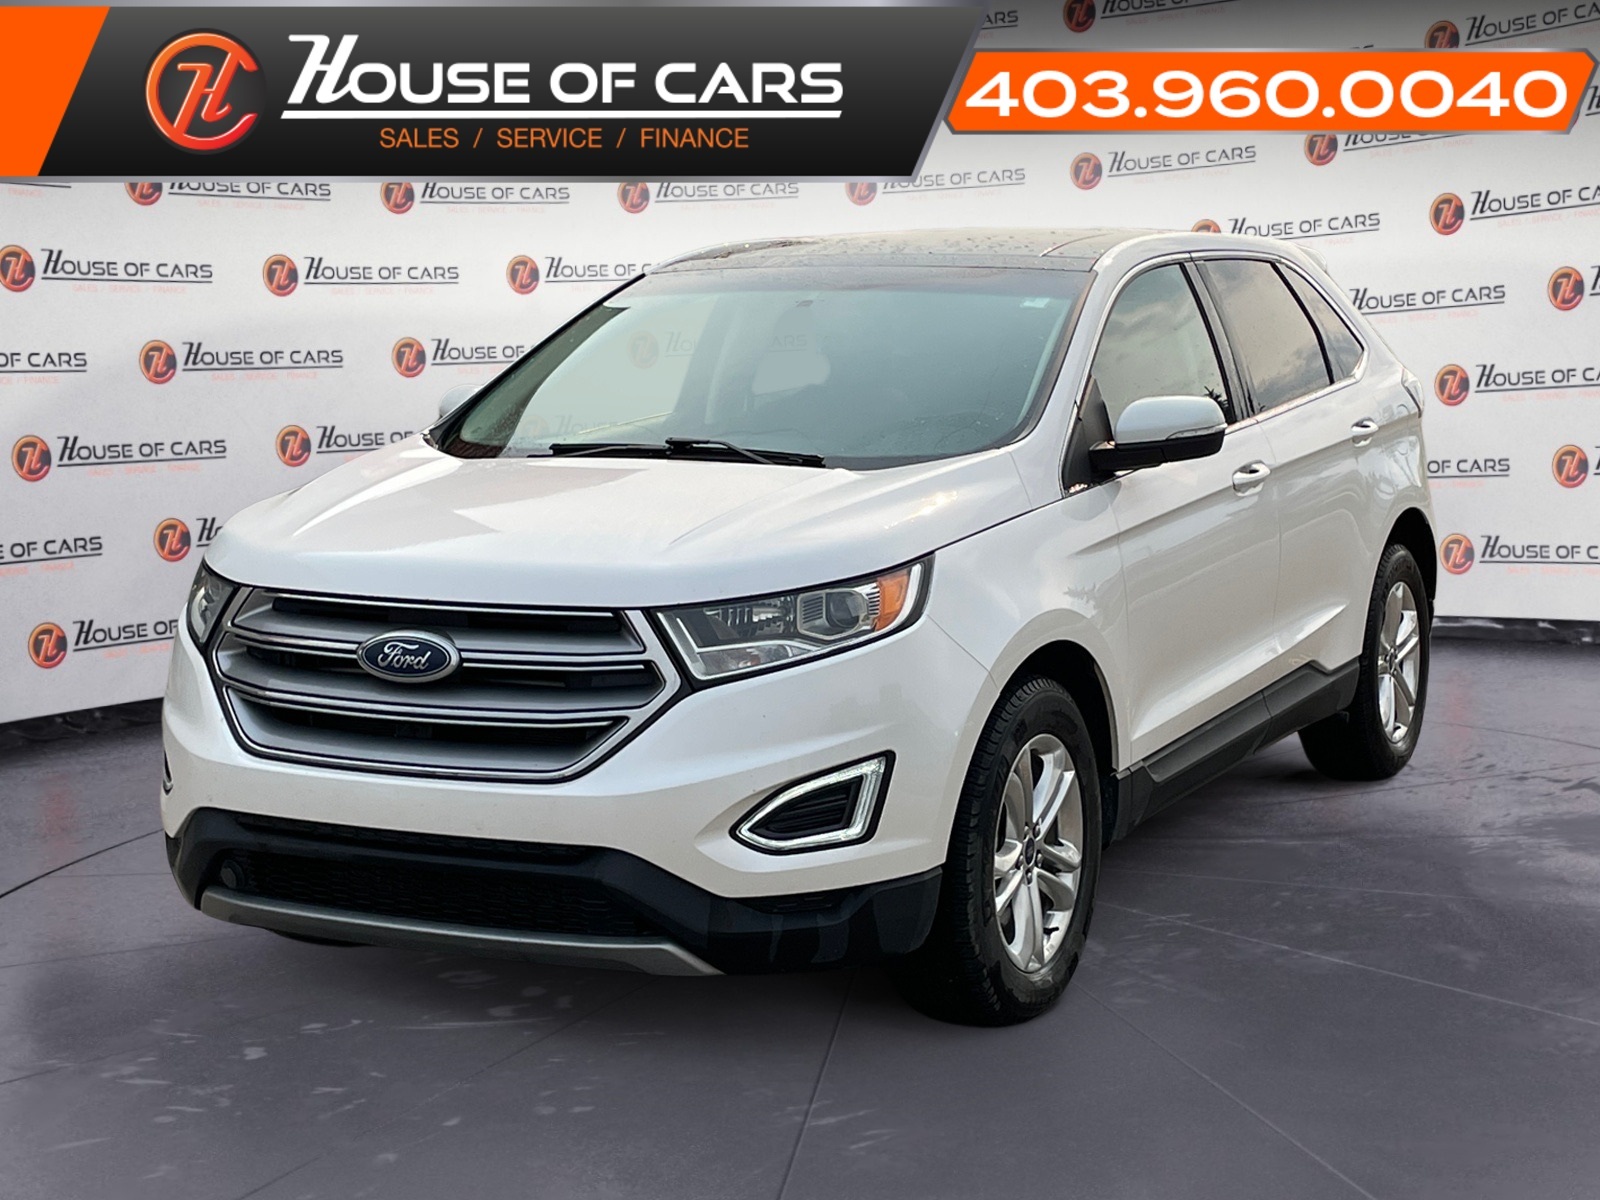 2017 Ford Edge 4dr SEL AWD/ Pan Sunroof/ Leather Interior